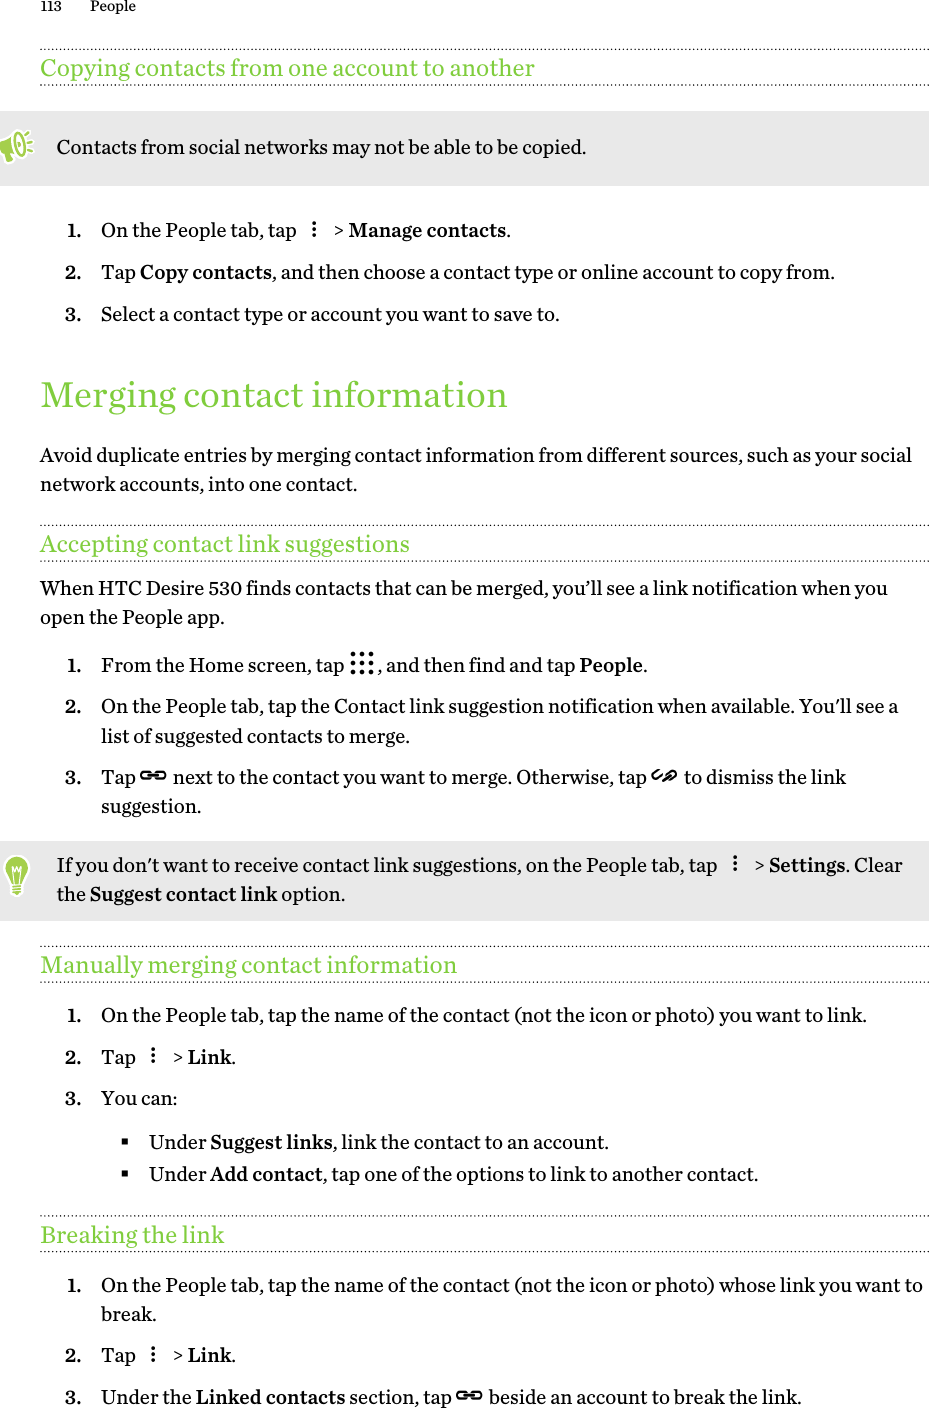 Copying contacts from one account to anotherContacts from social networks may not be able to be copied.1. On the People tab, tap   &gt; Manage contacts.2. Tap Copy contacts, and then choose a contact type or online account to copy from.3. Select a contact type or account you want to save to.Merging contact informationAvoid duplicate entries by merging contact information from different sources, such as your socialnetwork accounts, into one contact.Accepting contact link suggestionsWhen HTC Desire 530 finds contacts that can be merged, you’ll see a link notification when youopen the People app.1. From the Home screen, tap  , and then find and tap People.2. On the People tab, tap the Contact link suggestion notification when available. You&apos;ll see alist of suggested contacts to merge.3. Tap   next to the contact you want to merge. Otherwise, tap   to dismiss the linksuggestion.If you don&apos;t want to receive contact link suggestions, on the People tab, tap   &gt; Settings. Clearthe Suggest contact link option.Manually merging contact information1. On the People tab, tap the name of the contact (not the icon or photo) you want to link.2. Tap   &gt; Link.3. You can:§Under Suggest links, link the contact to an account.§Under Add contact, tap one of the options to link to another contact.Breaking the link1. On the People tab, tap the name of the contact (not the icon or photo) whose link you want tobreak.2. Tap   &gt; Link.3. Under the Linked contacts section, tap   beside an account to break the link.113 People